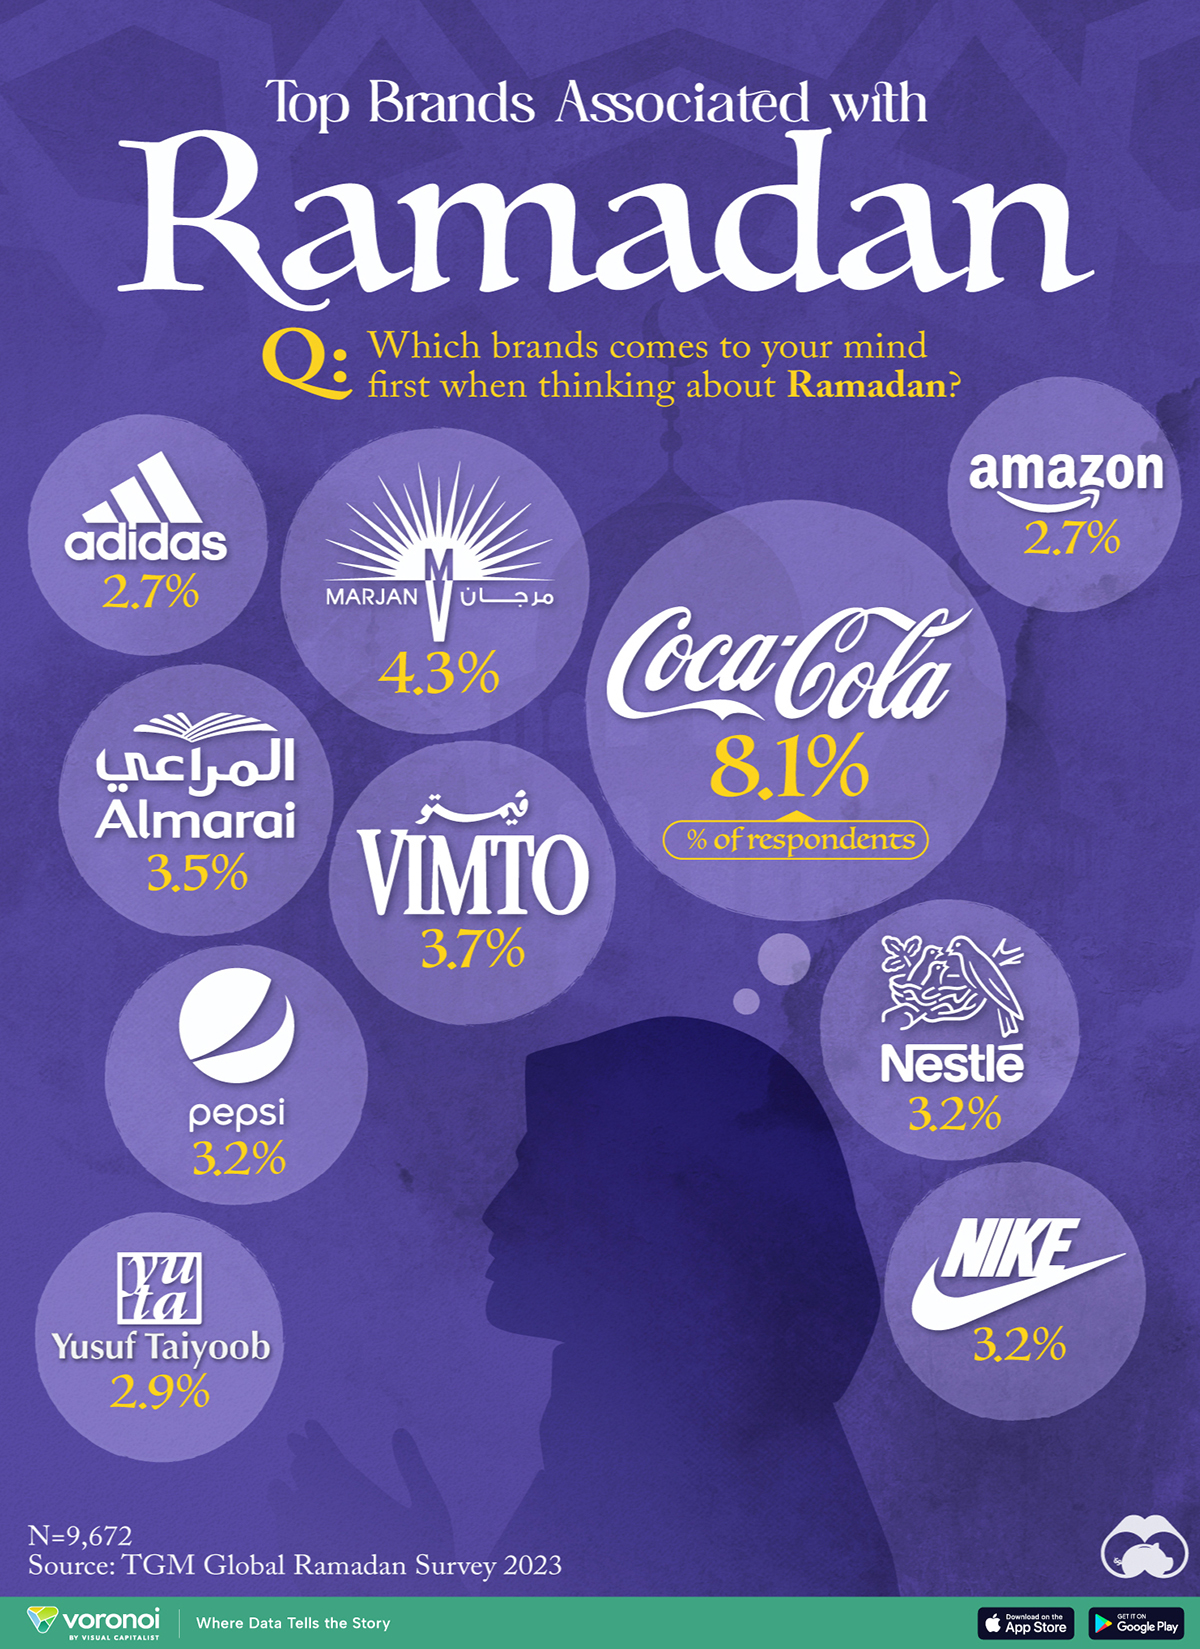 A chart showing the brands associated with Ramadan, according to a 2023 survey by TGM Research.